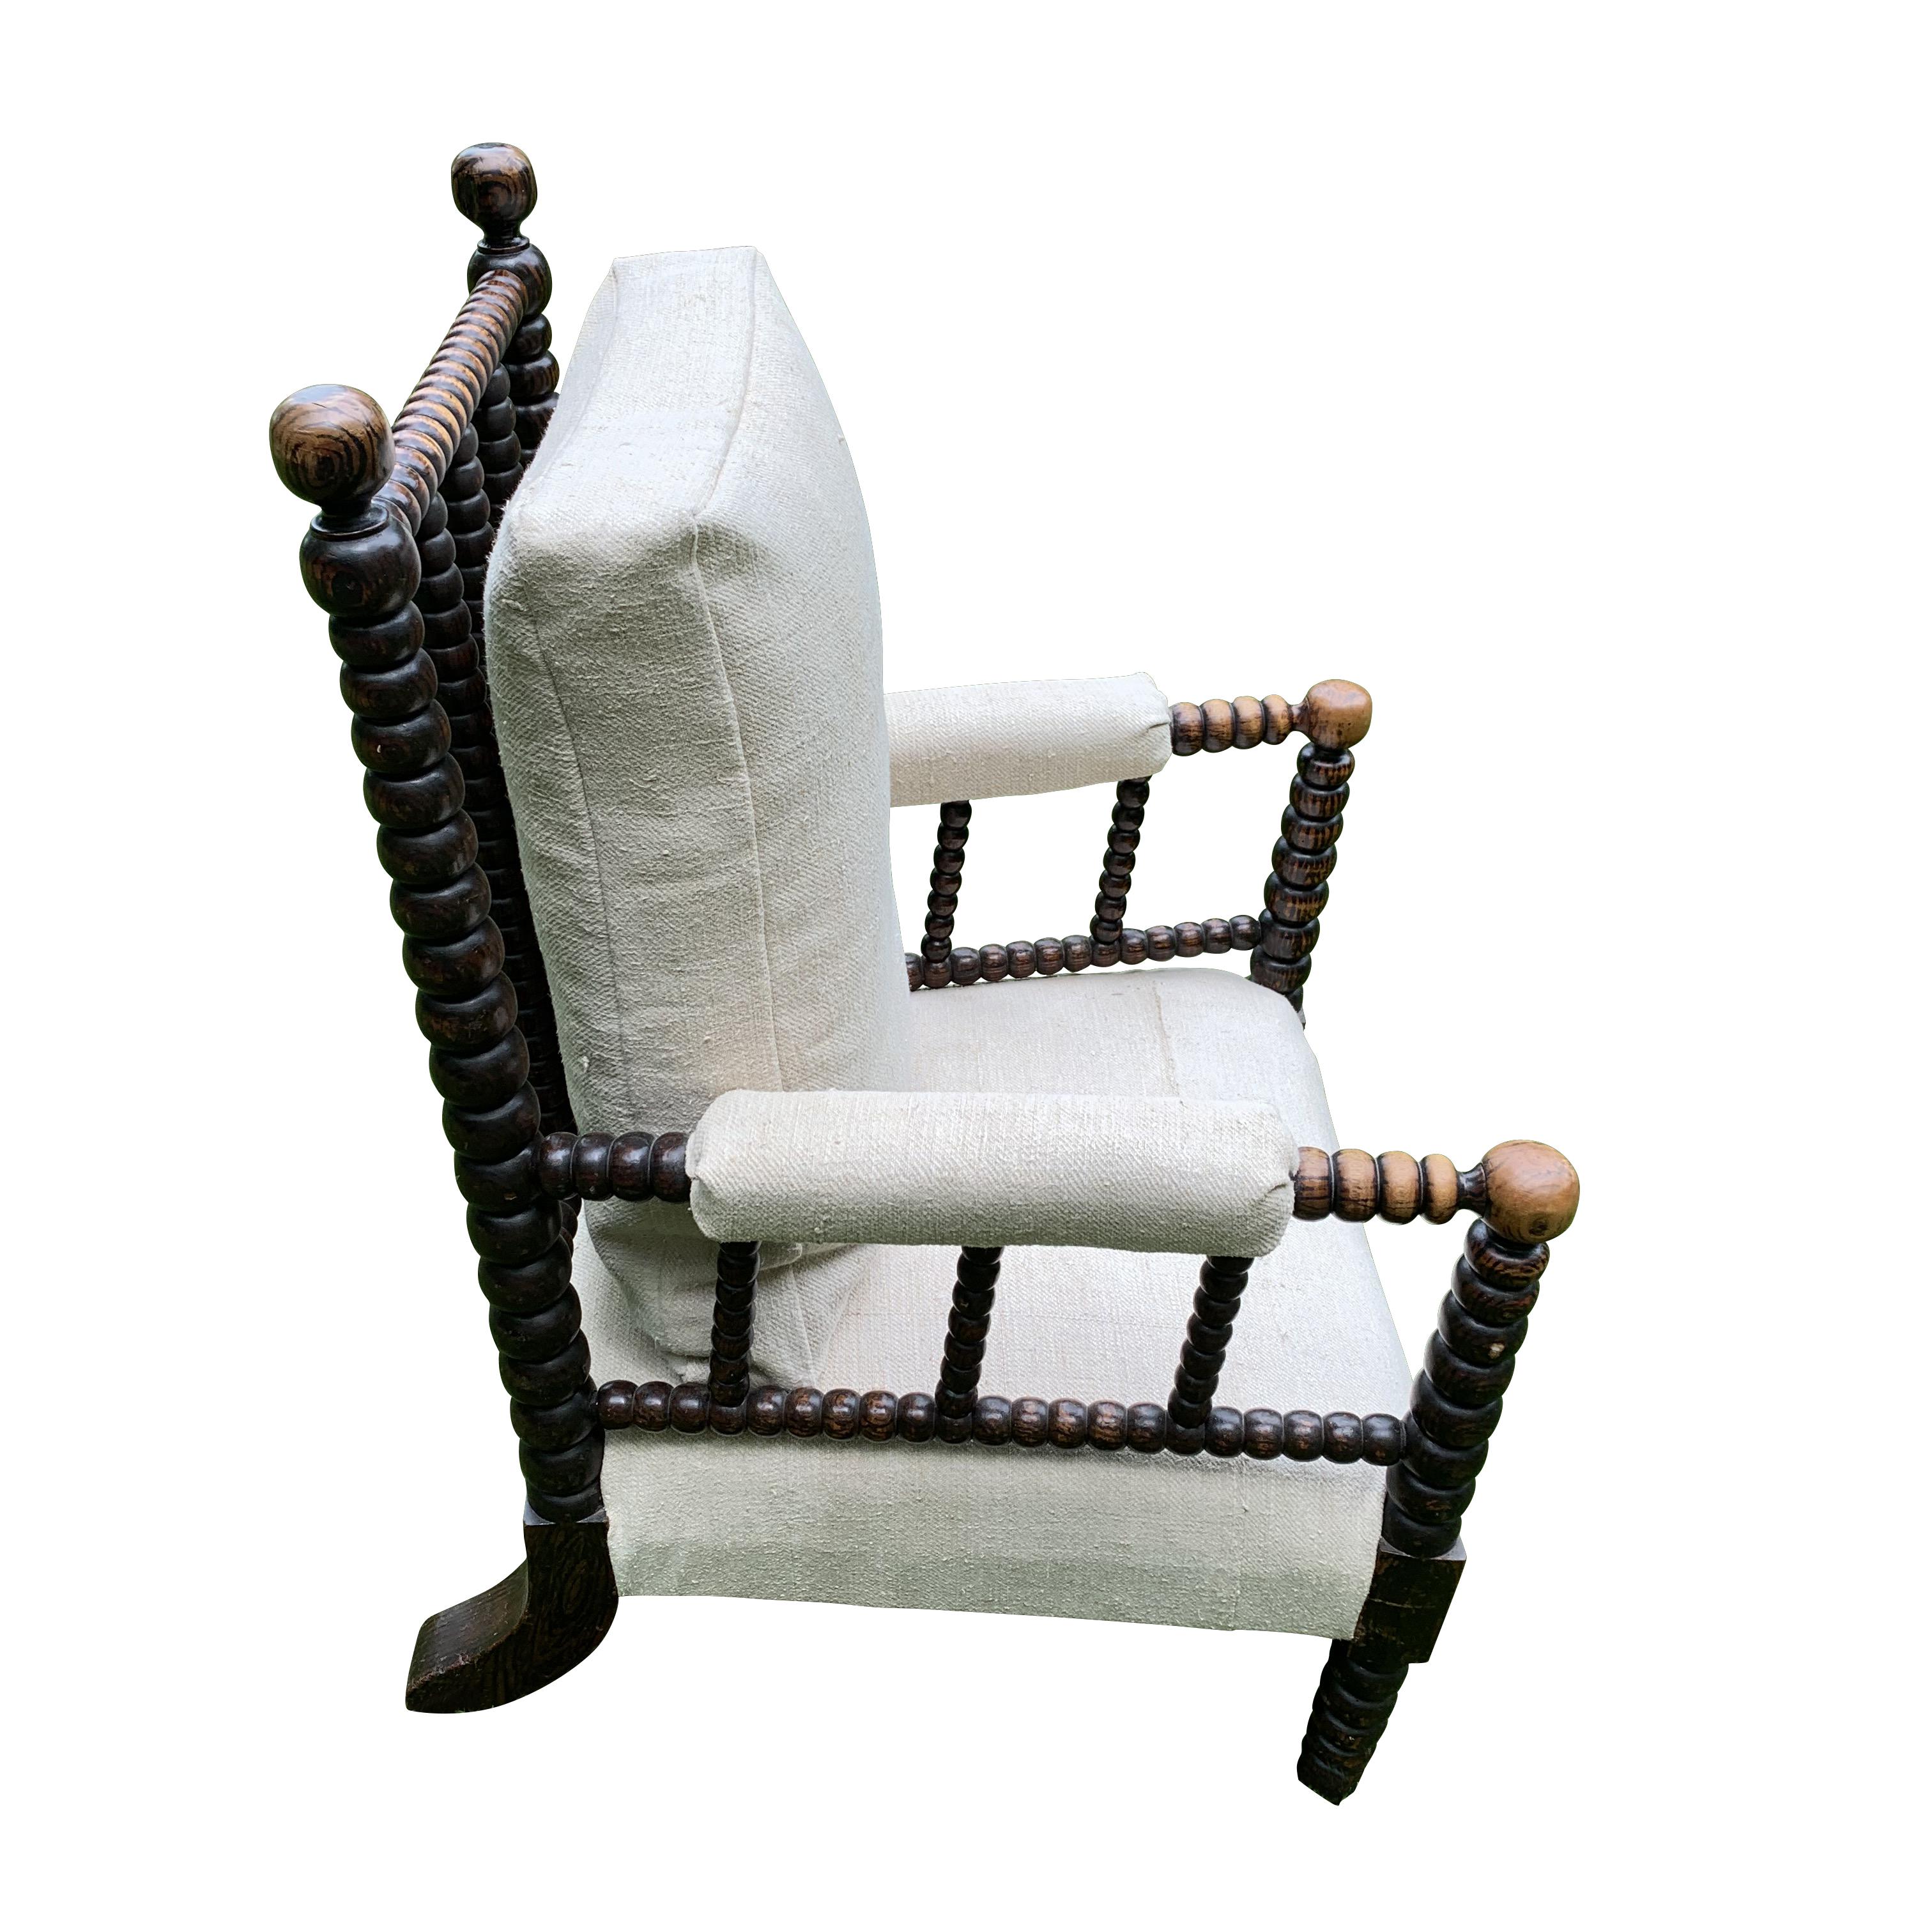 19th century English single upholstered bobbin armchair.
Bobbins appear on the exposed back frame making it as beautiful from behind as it is from the front.
Bobbins also appear on the legs and padded arms.
The chair is reupholstered in natural